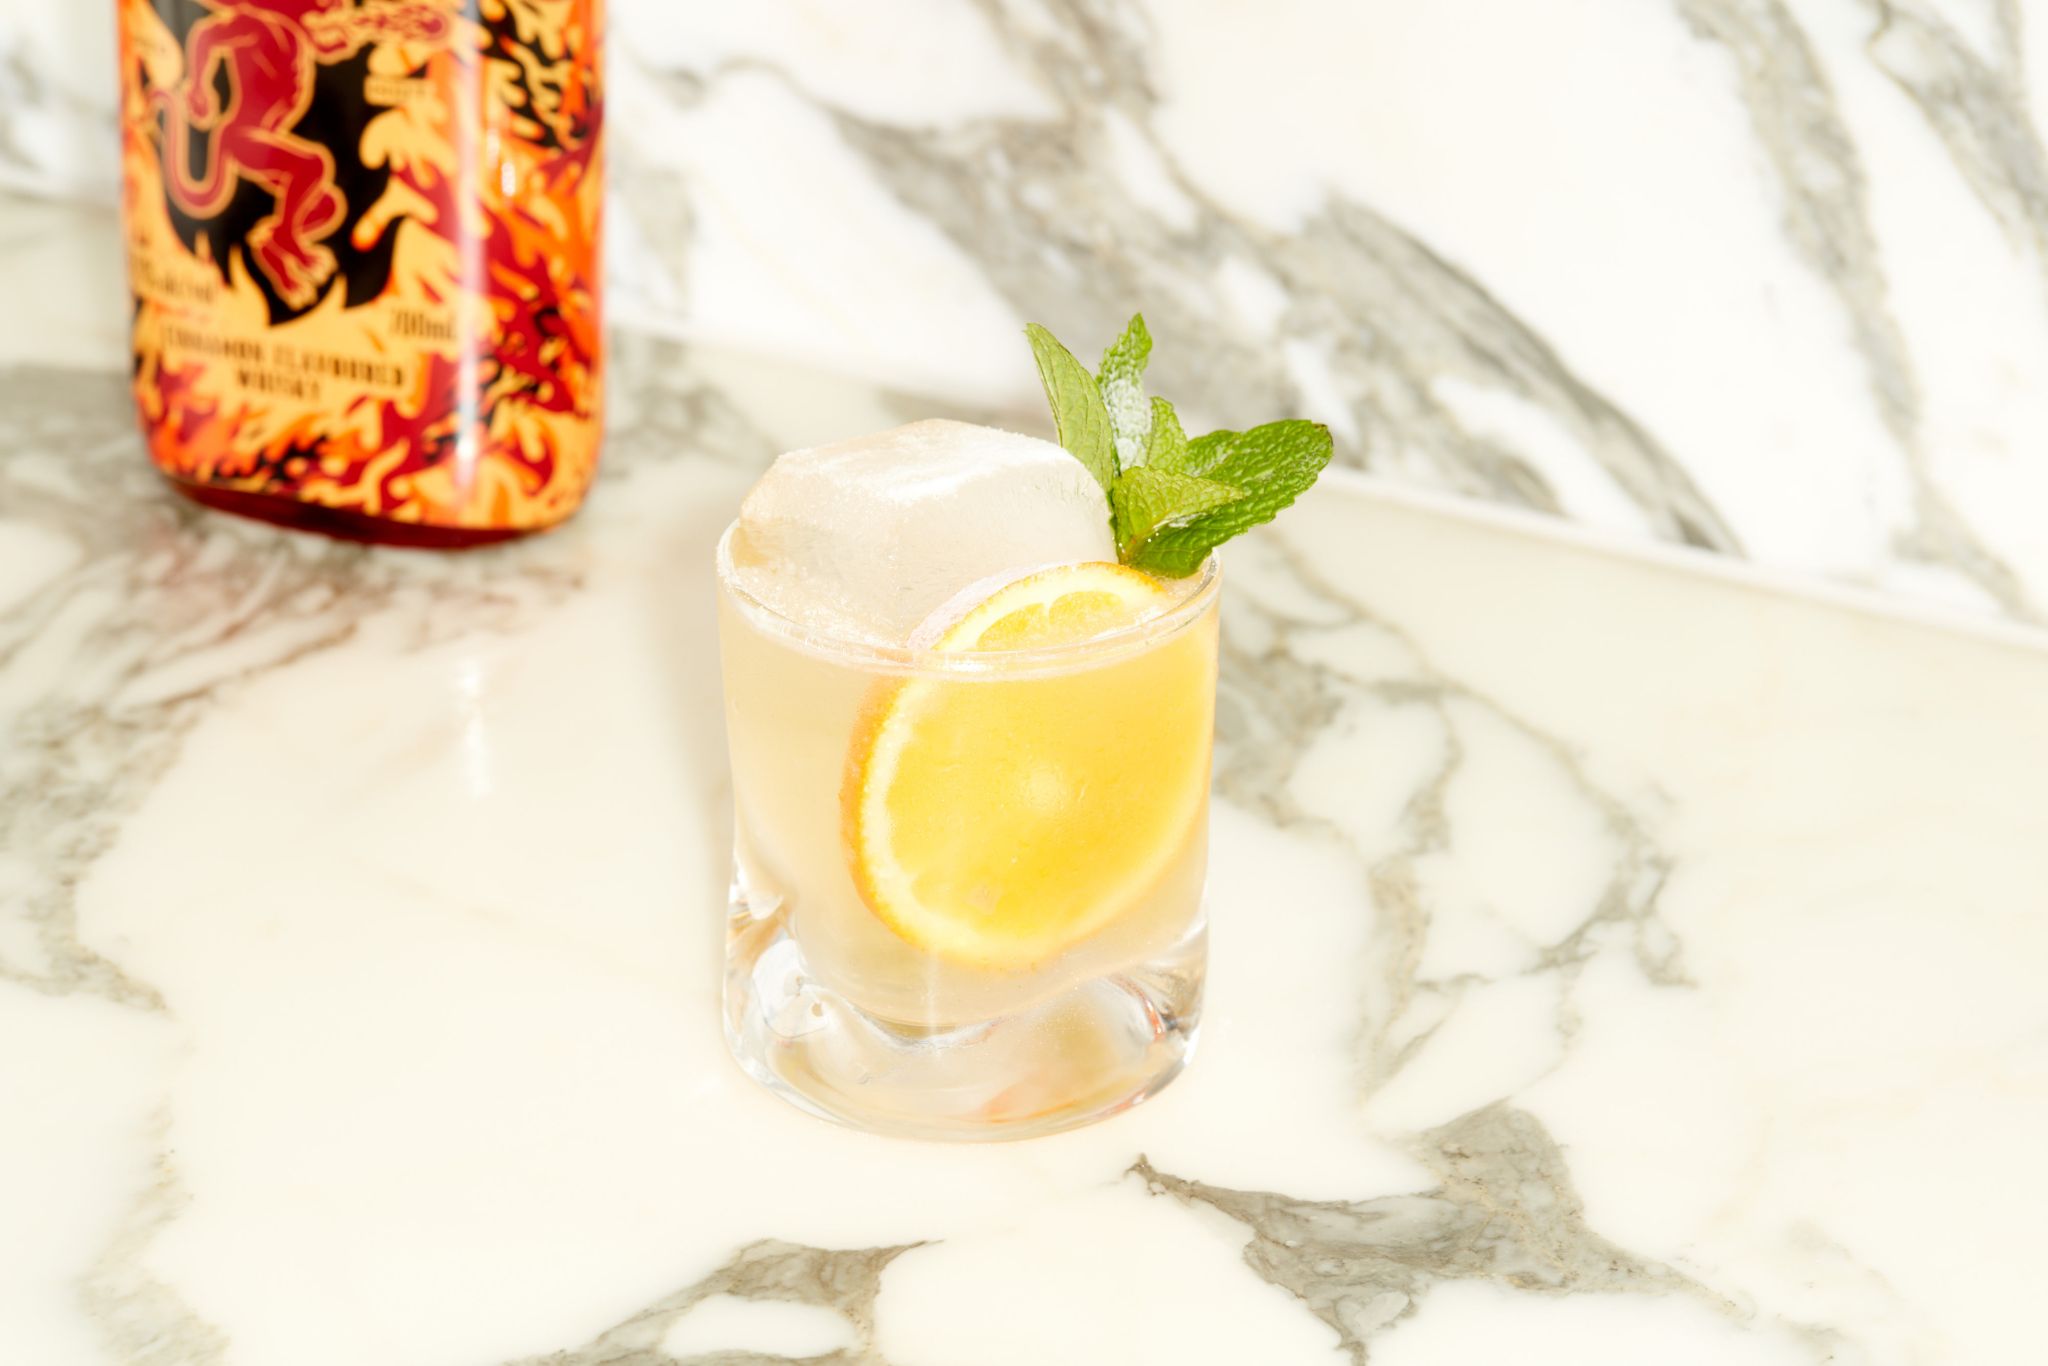 2-Ingredient Fireball and Ginger Ale Cocktail Recipe